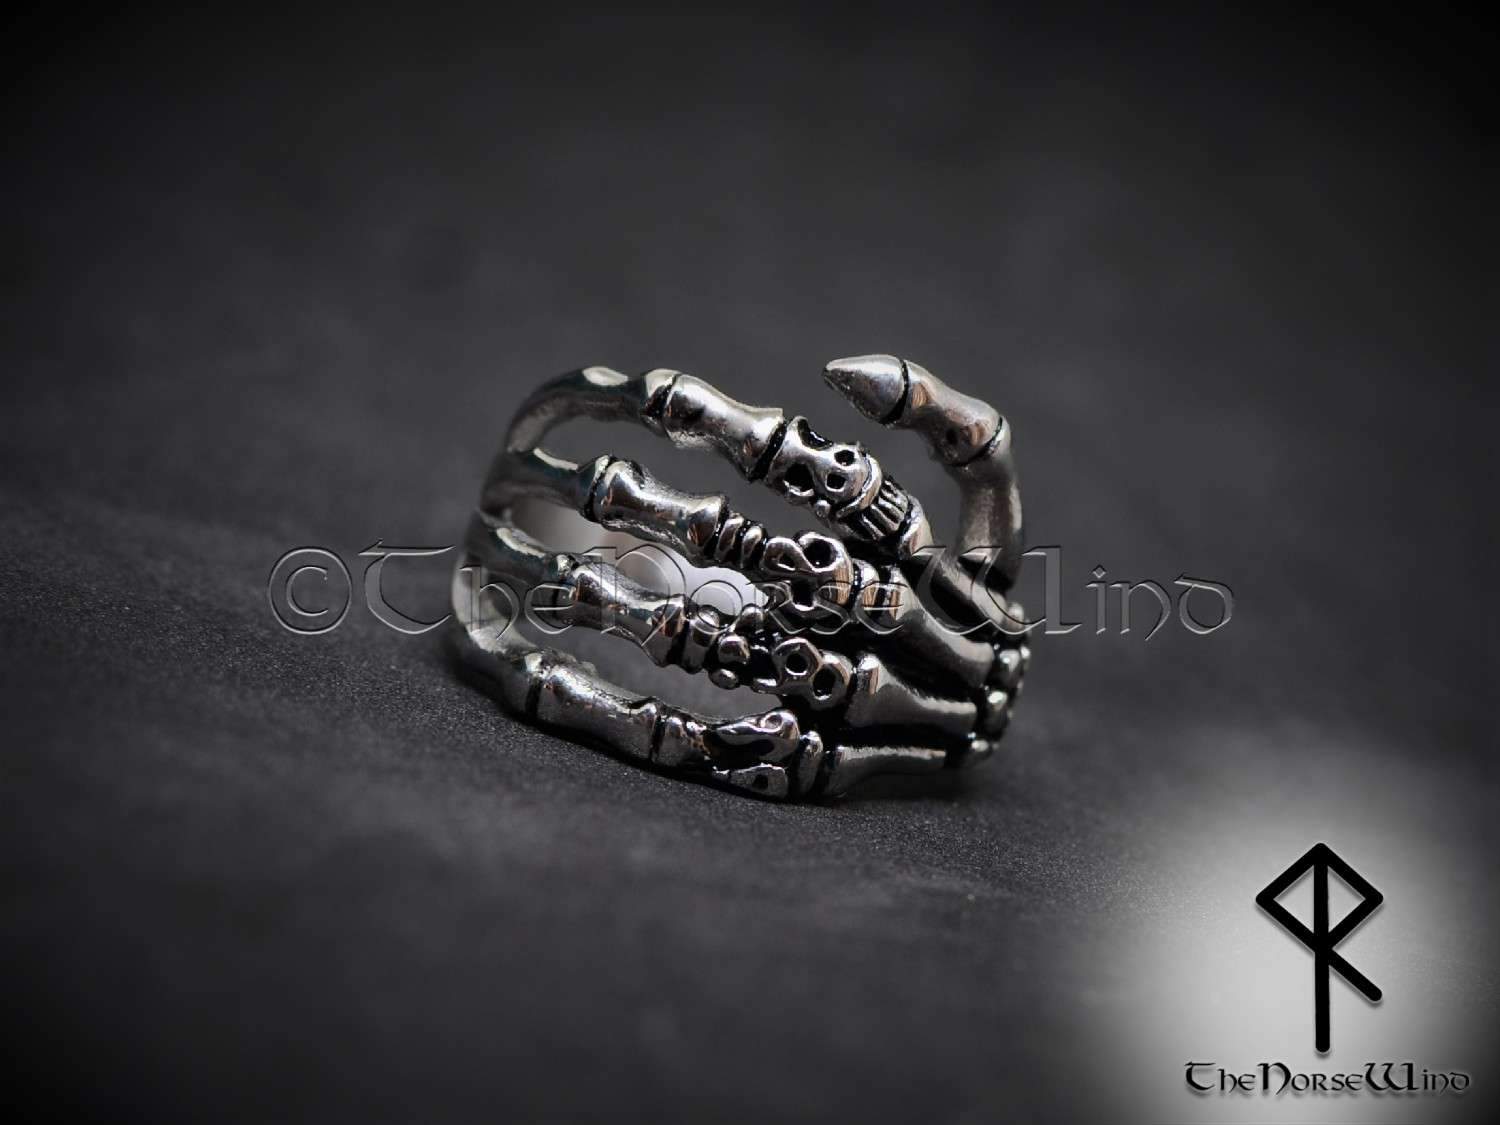 Gothic Skull Ring Skeleton Hand Stainless Steel - TheNorseWind